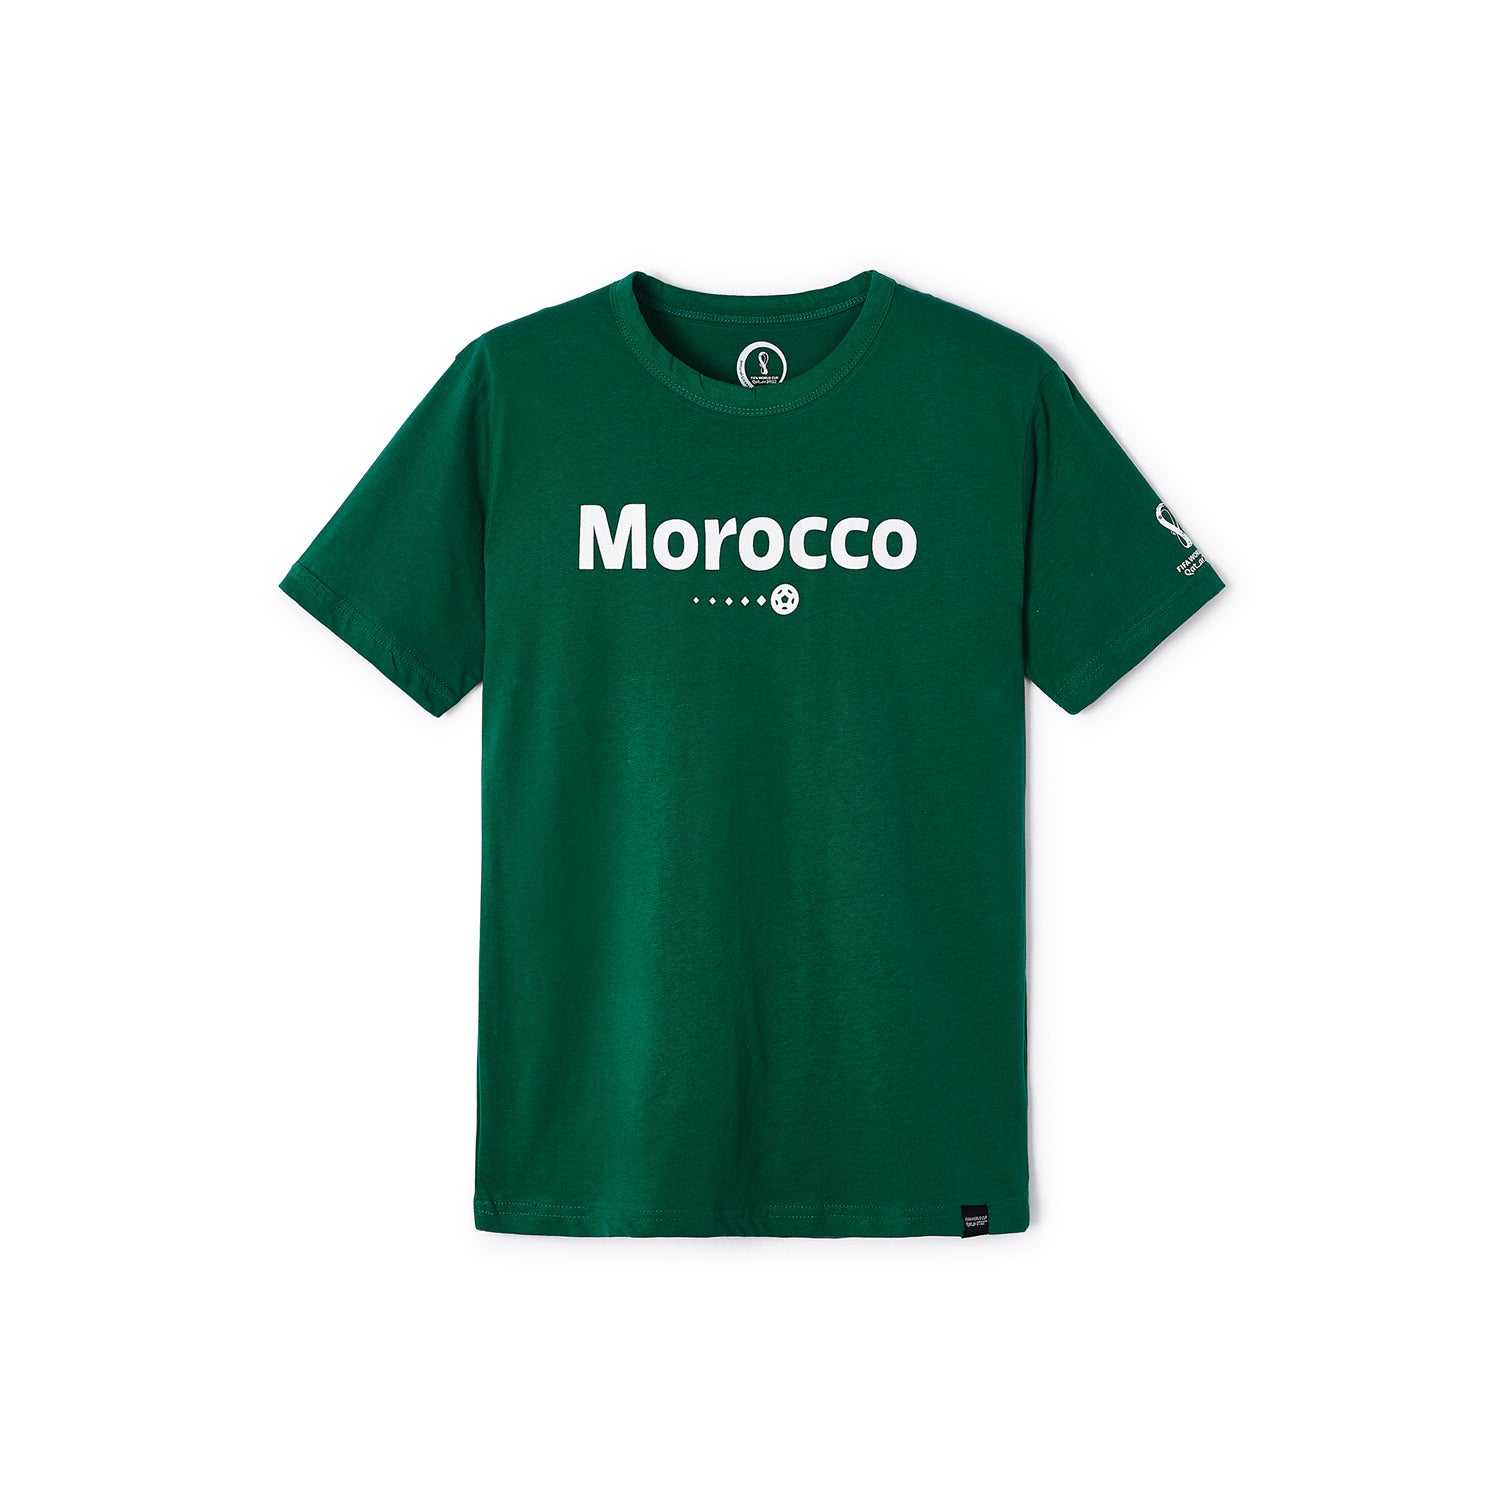 2022 World Cup Morocco Green T-Shirt - Youth